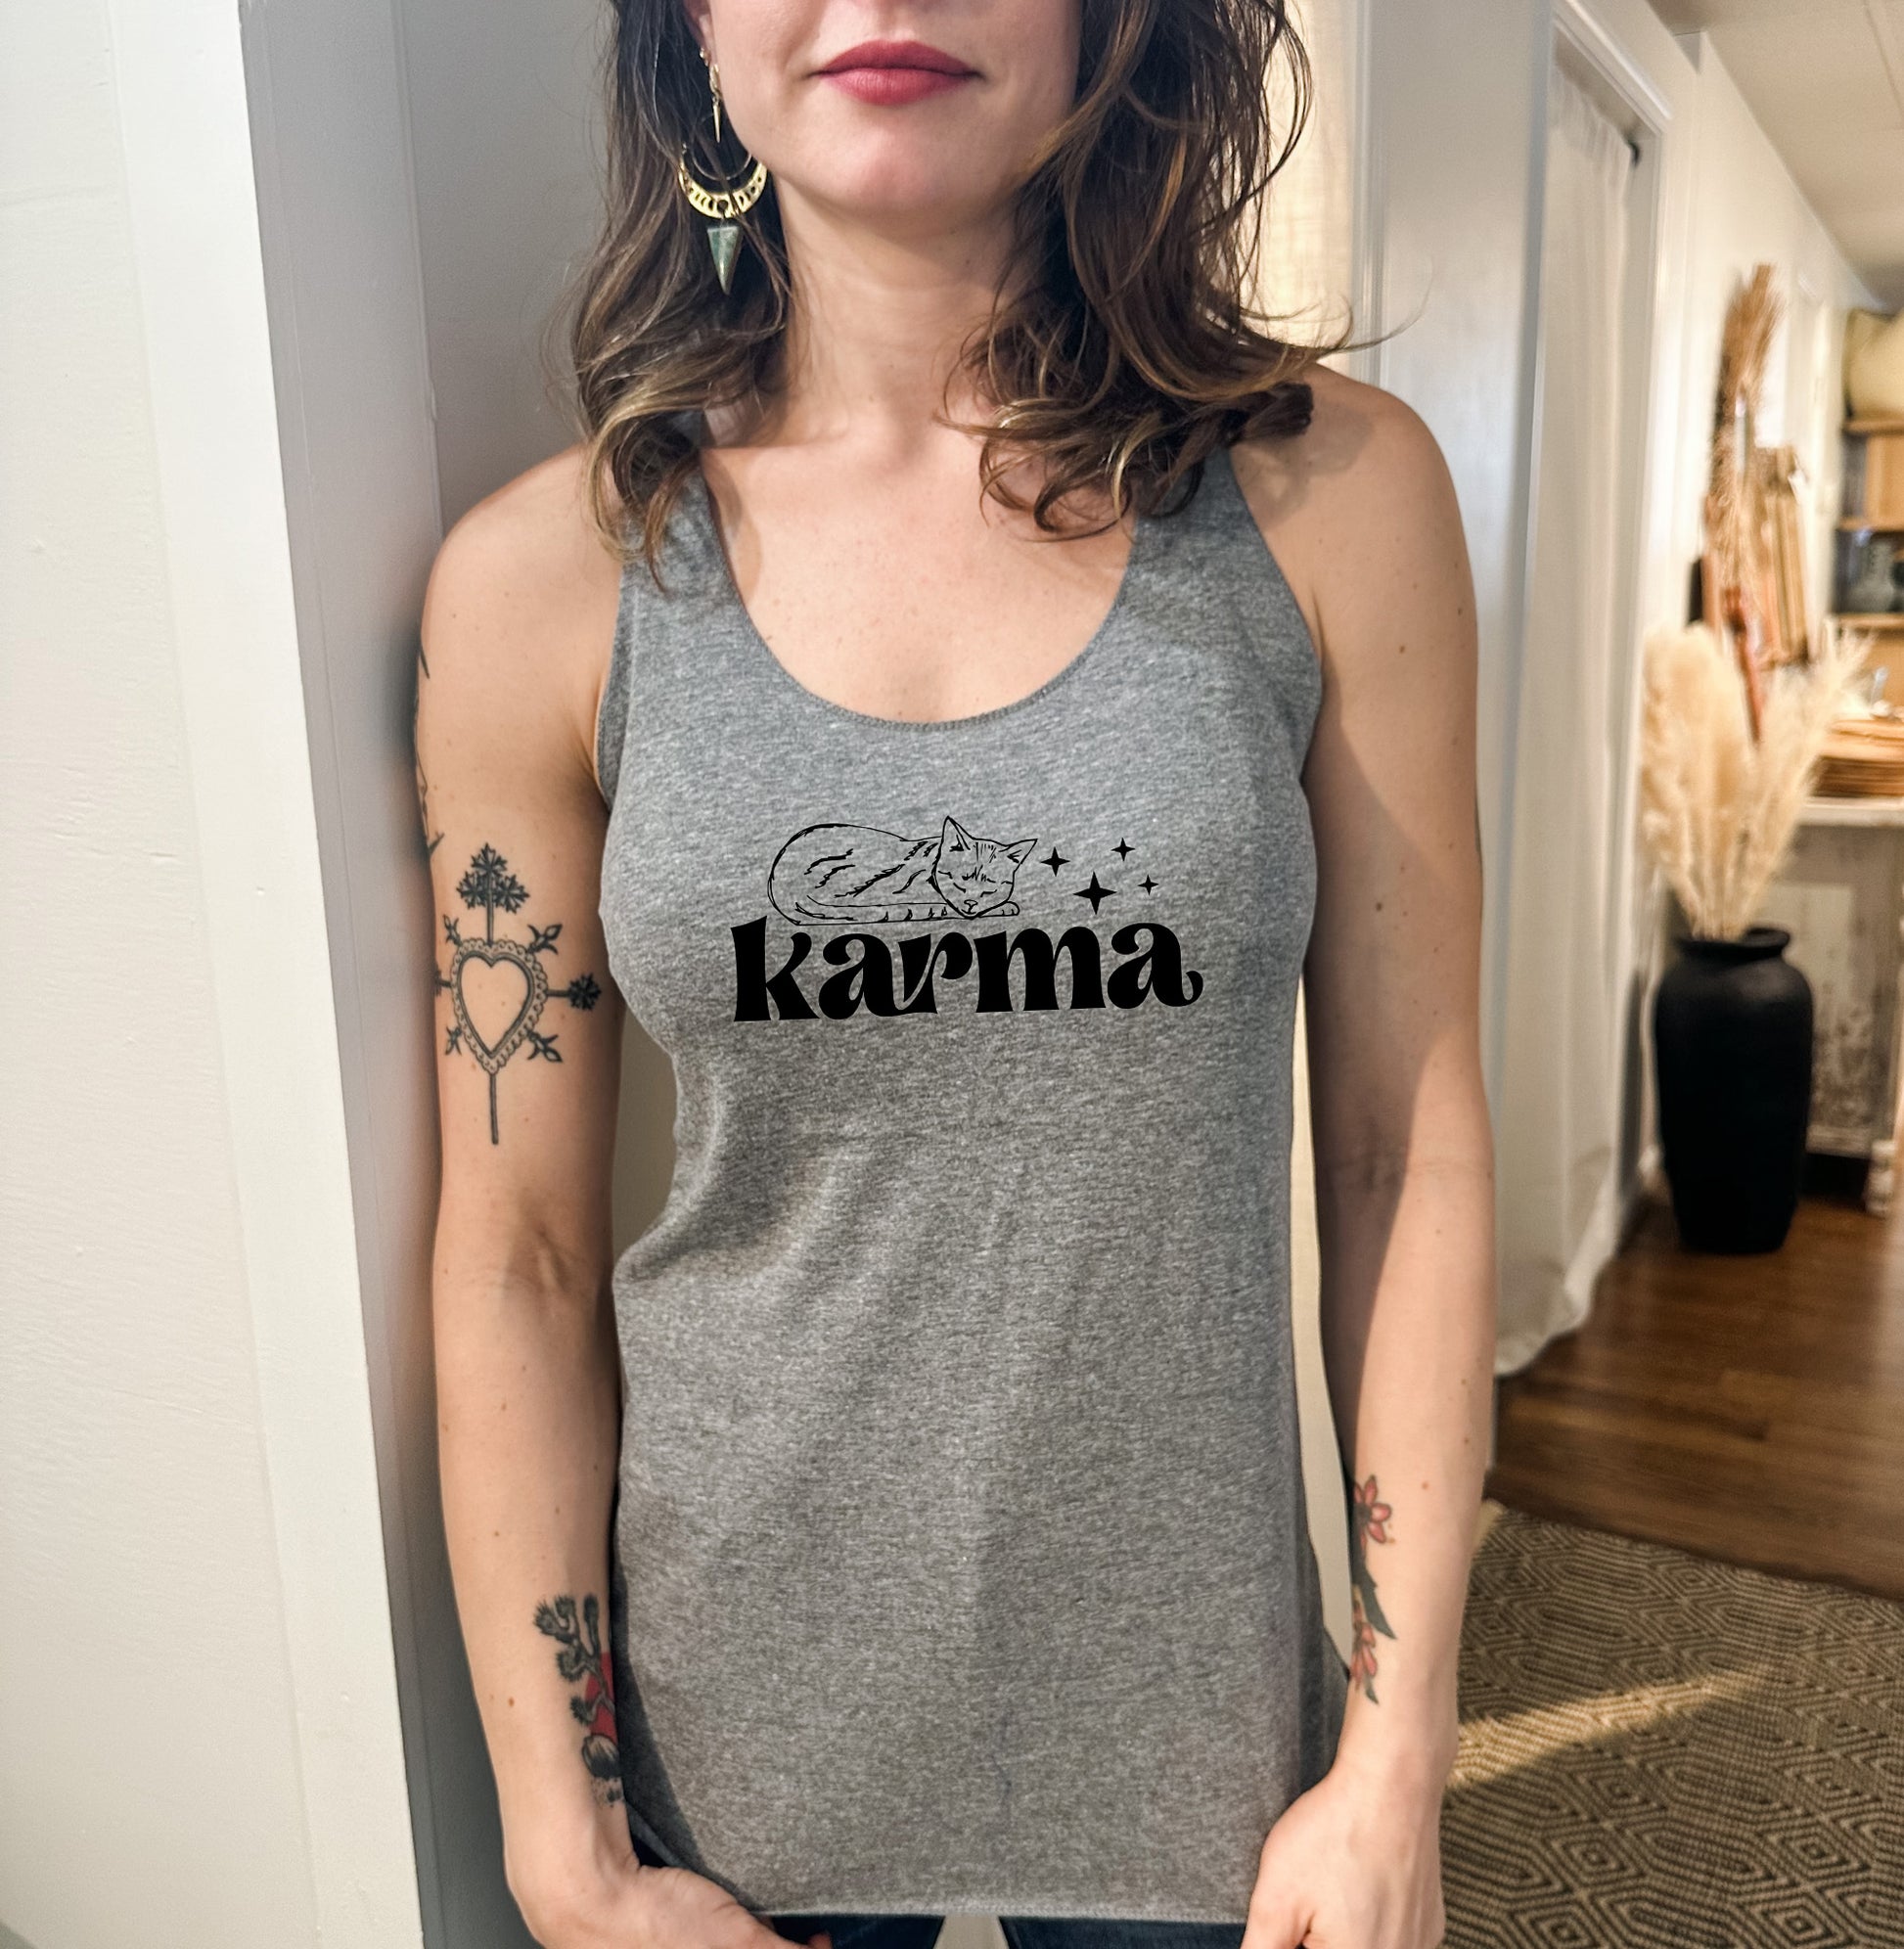 a woman wearing a gray tank top with the word karma on it